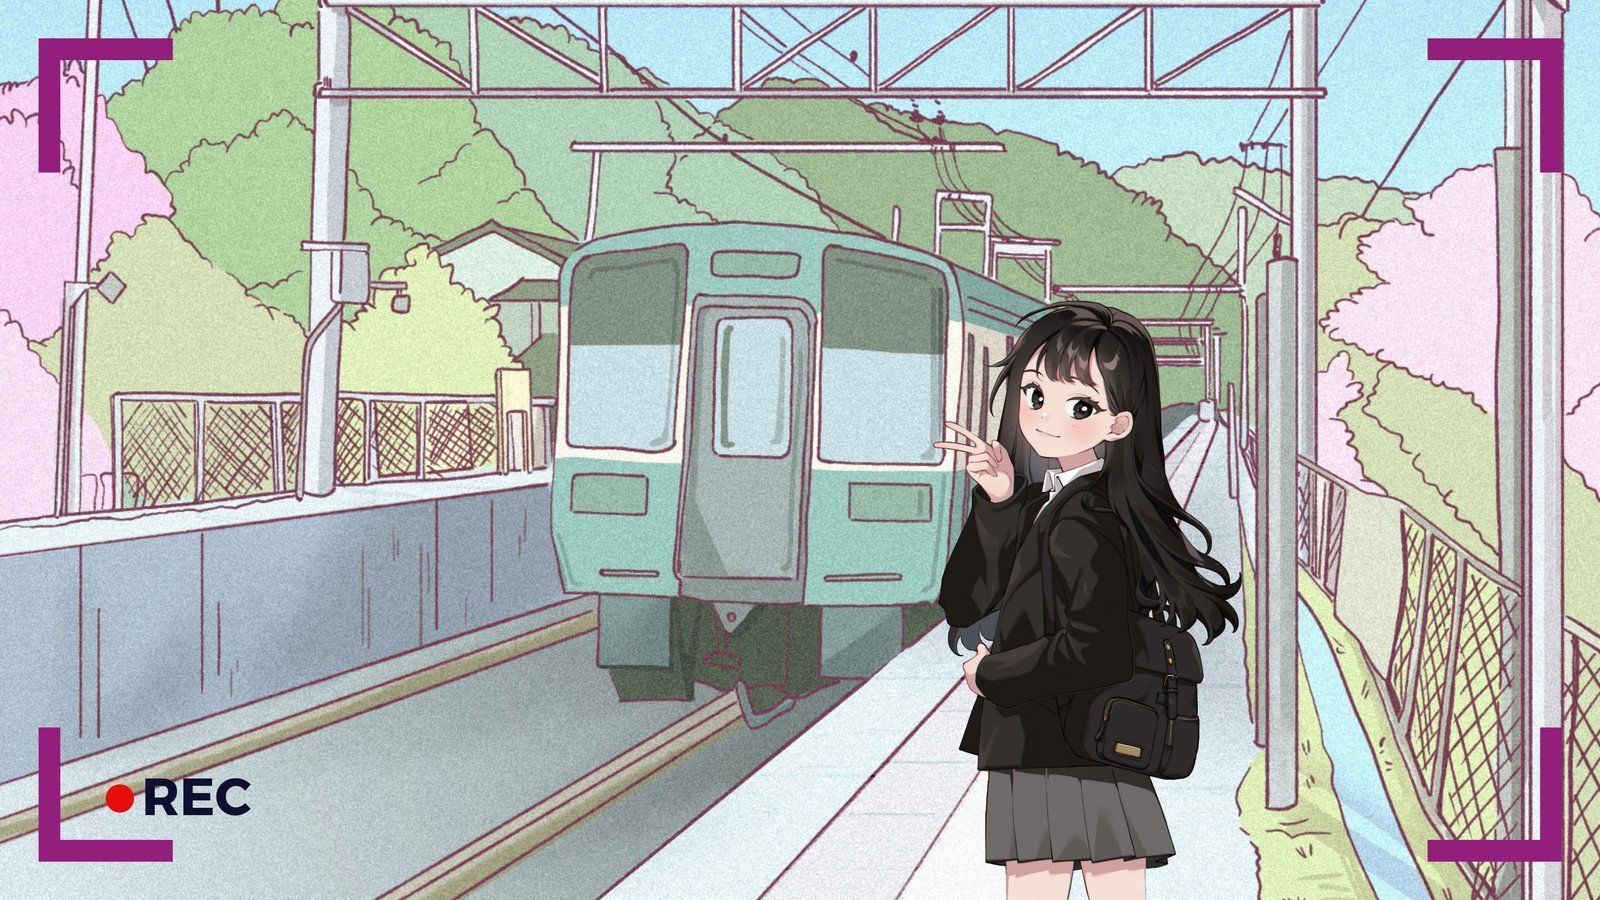 A girl in a school uniform stands on a train platform, pointing to a train. The image has a pastel aesthetic. - Pink anime, Japan